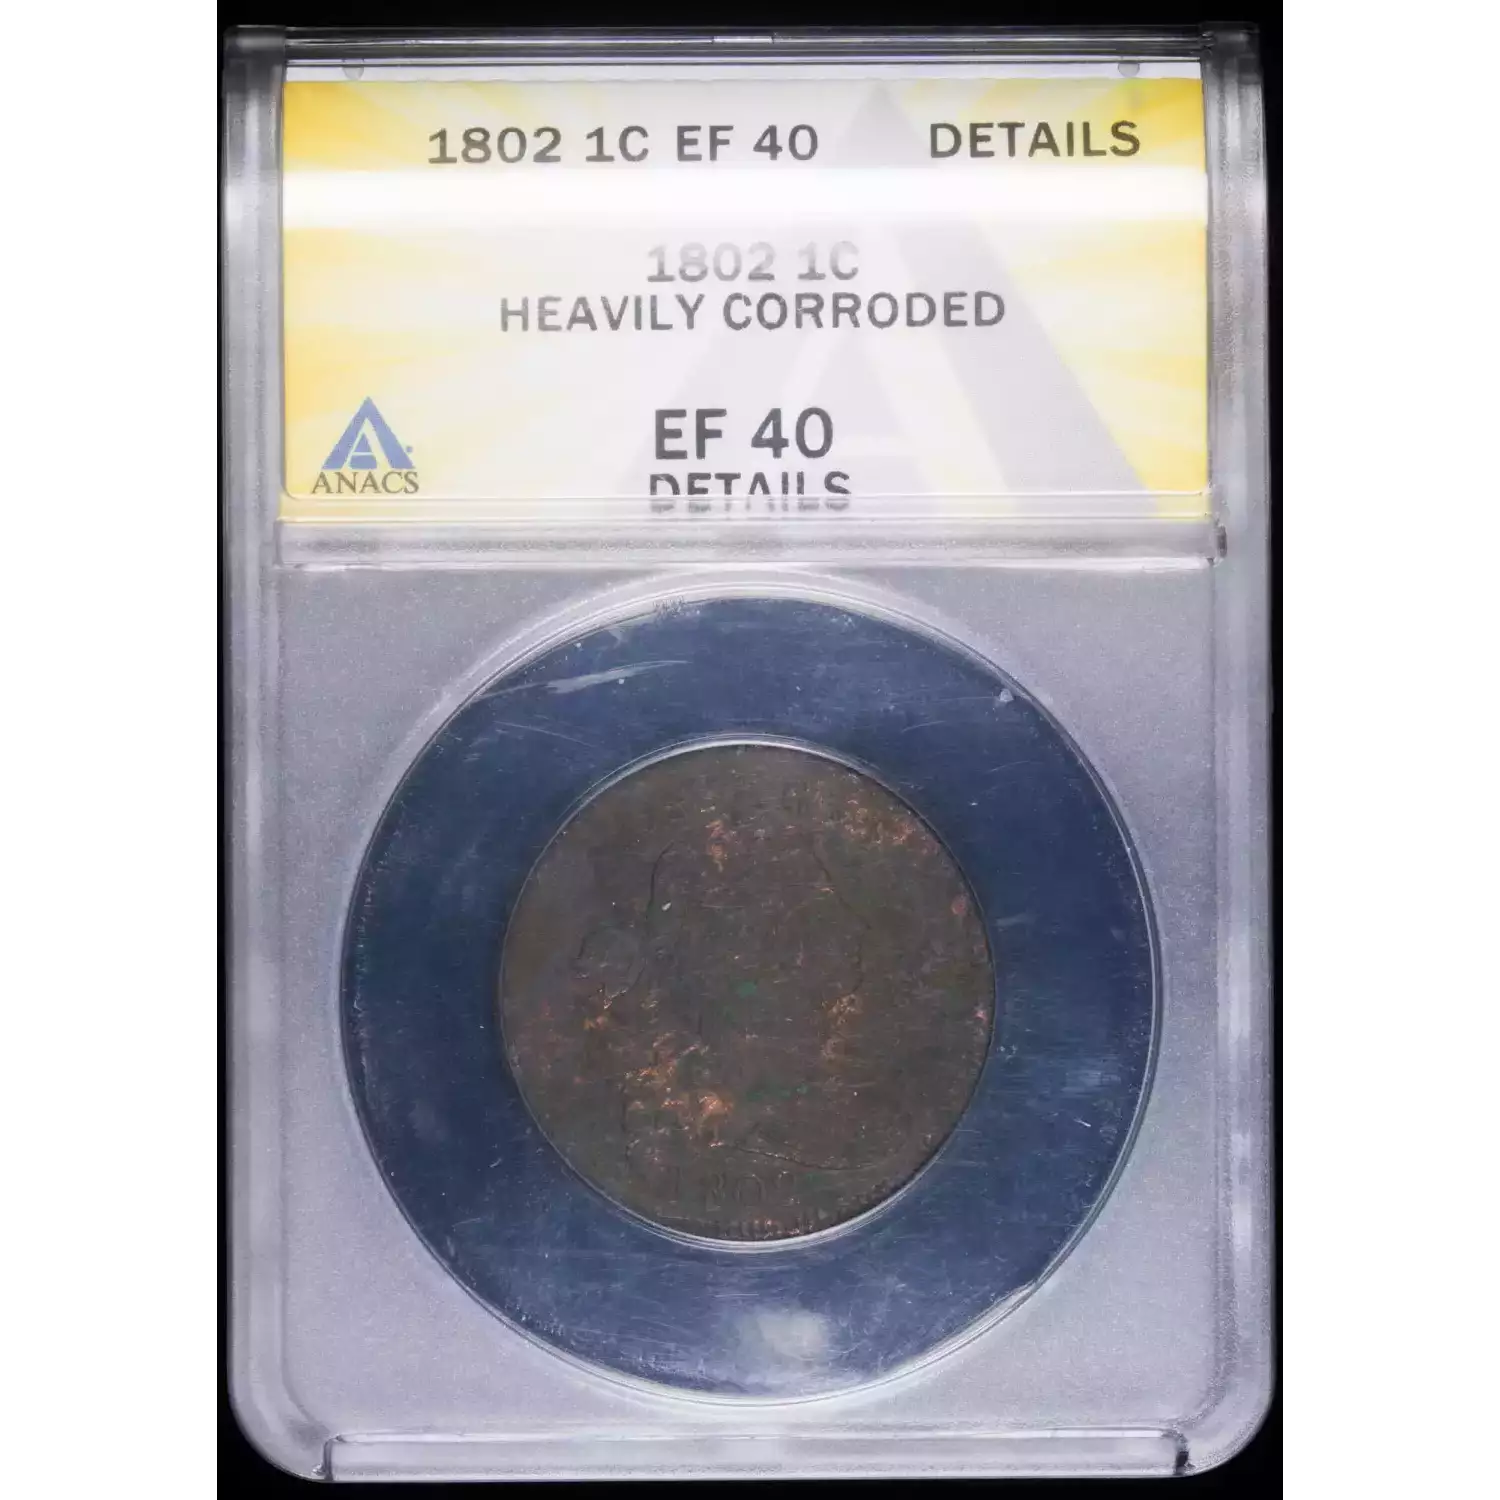 Large Cents---Draped Bust 1796-1807 -Copper- 1 Cent